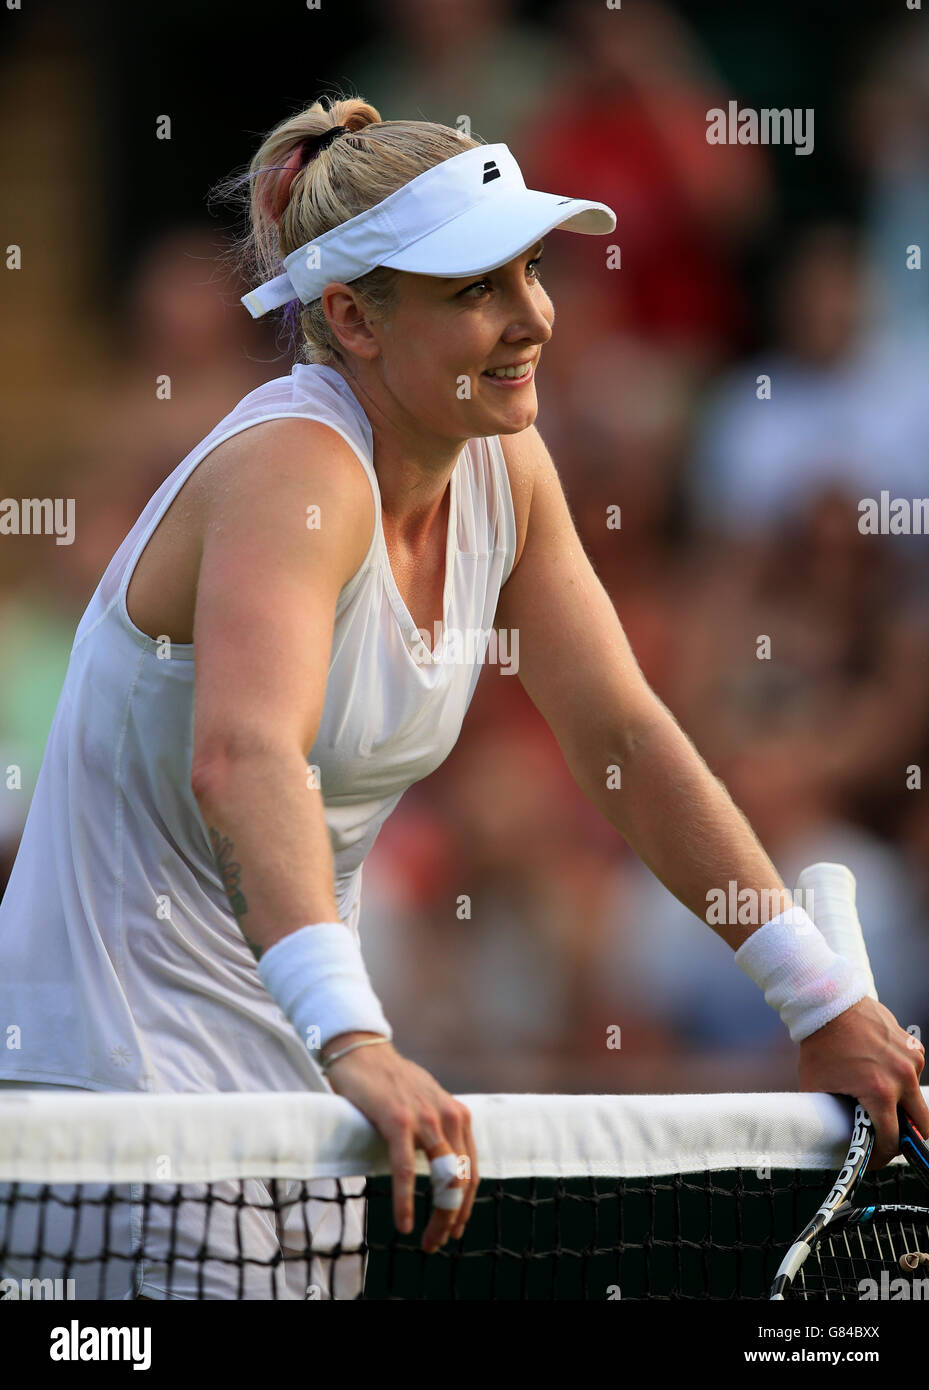 Bethanie Mattek-Sands celebrates against Ana Ivanovic on day Three of the Wimbledon Championships at the All England Lawn Tennis and Croquet Club, Wimbledon. Stock Photo